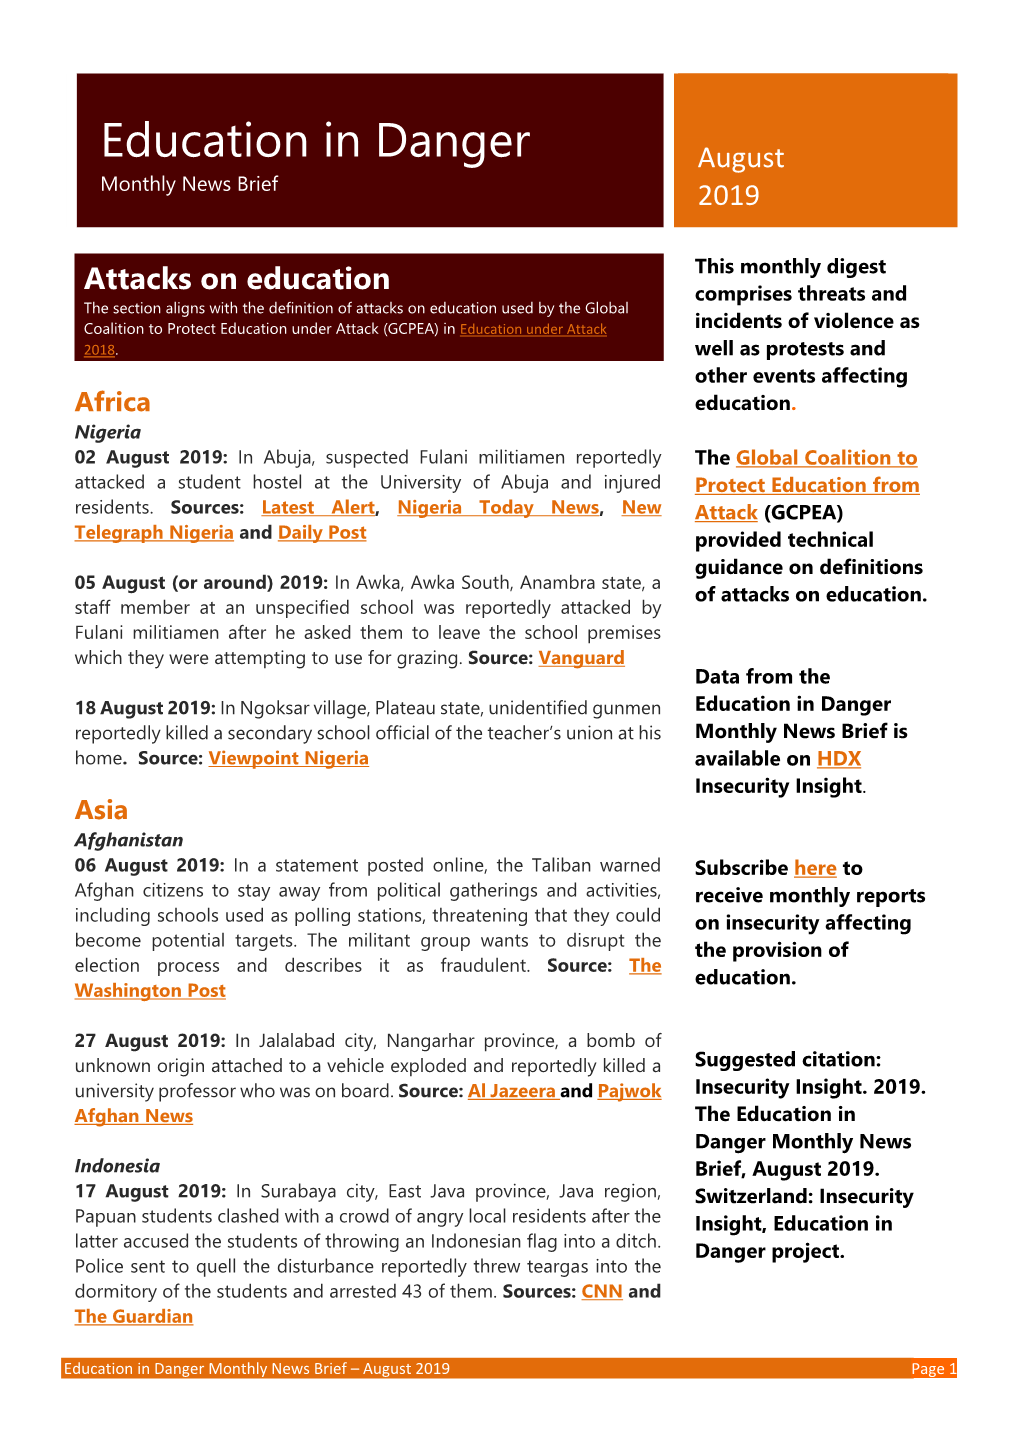 Education in Danger August Monthly News Brief 2019